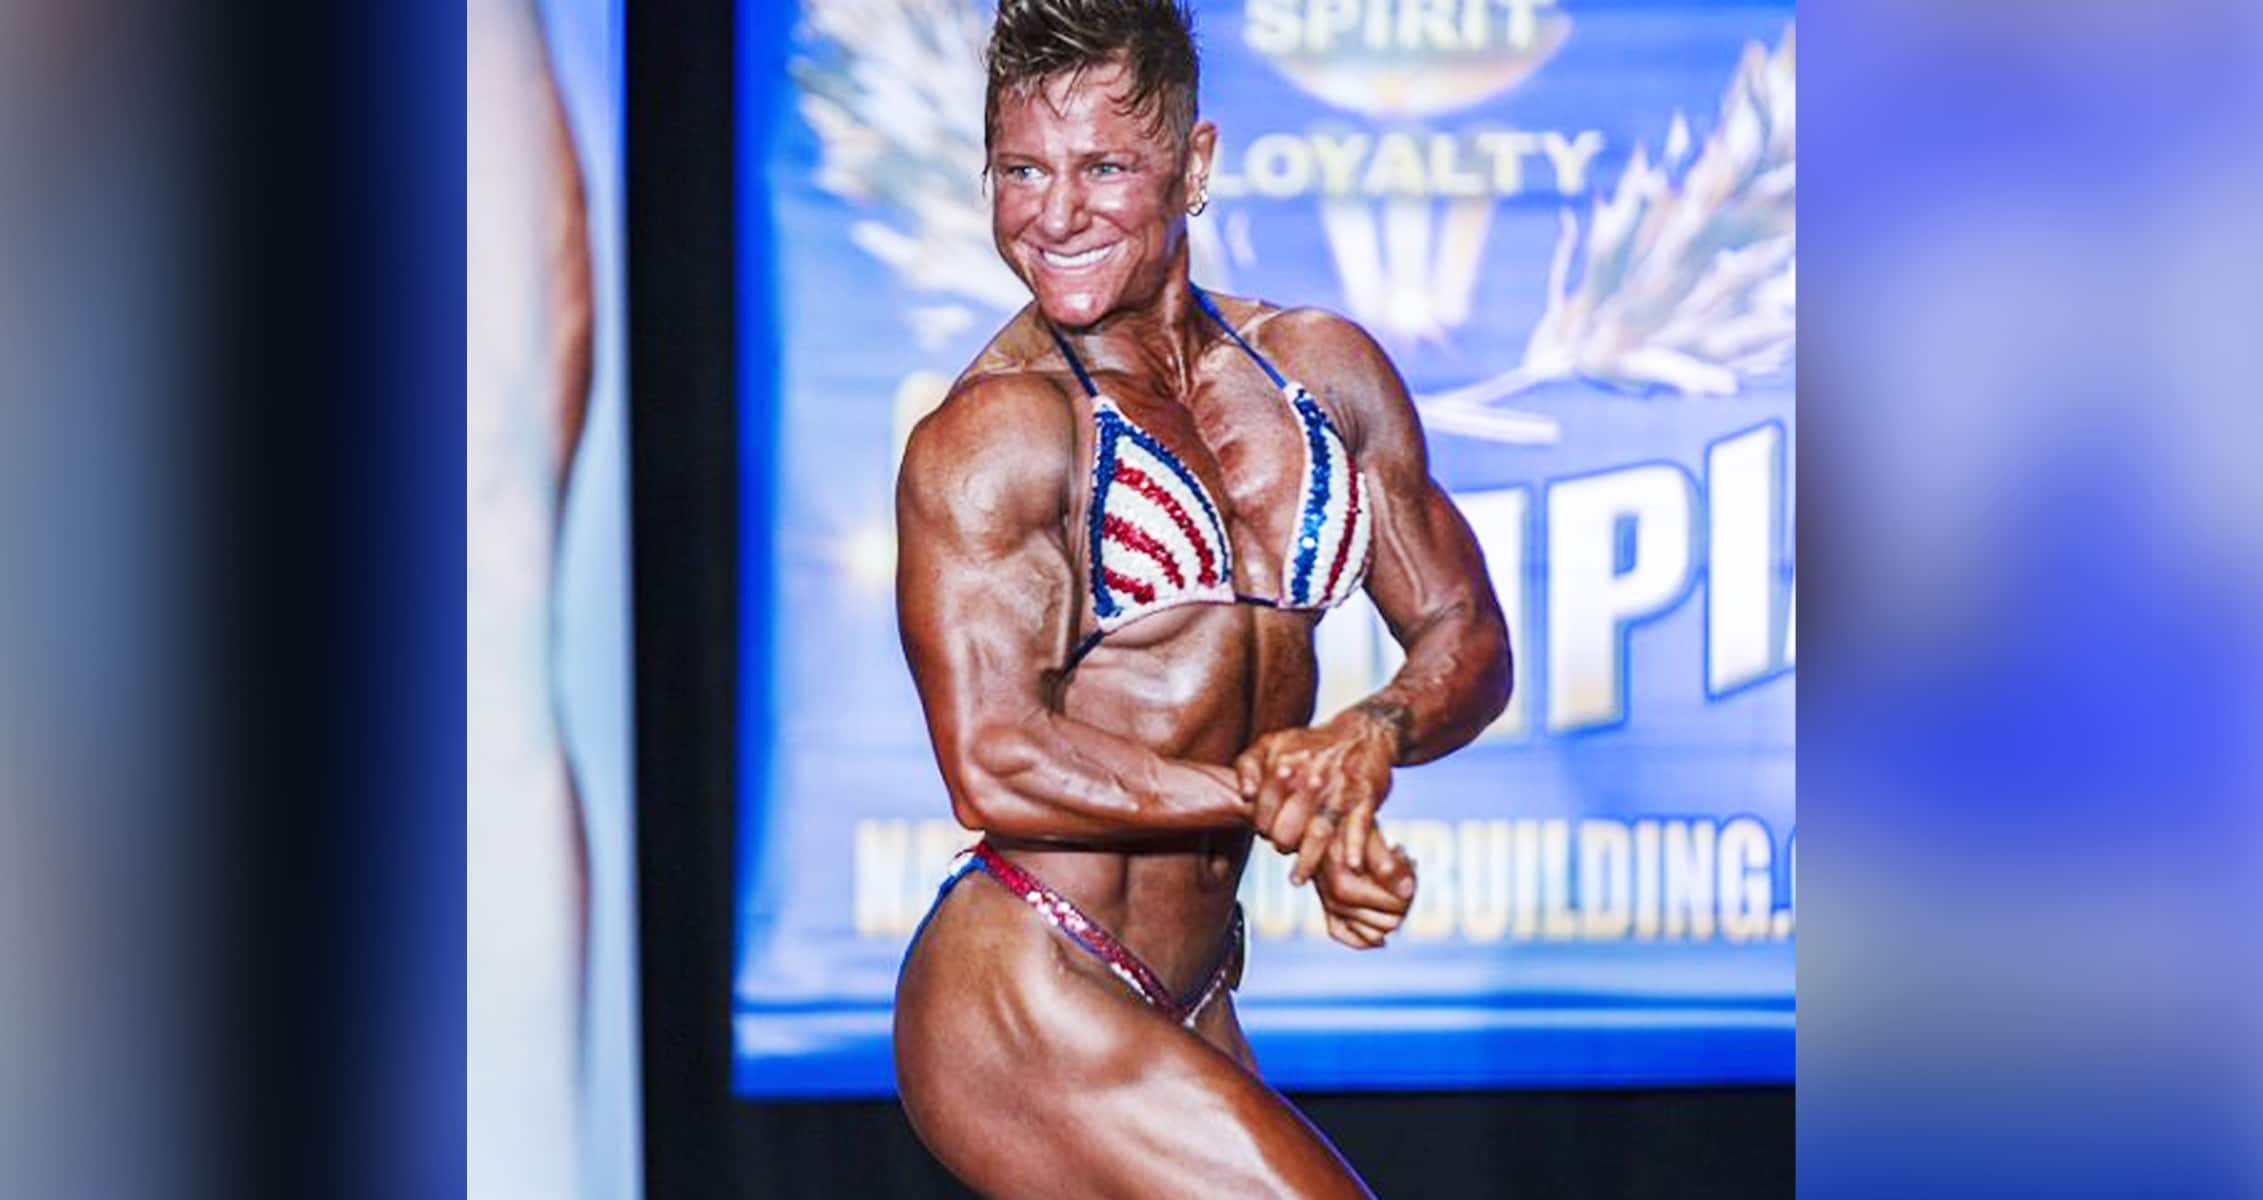 Is Female Bodybuilding Without Drugs Impossible?